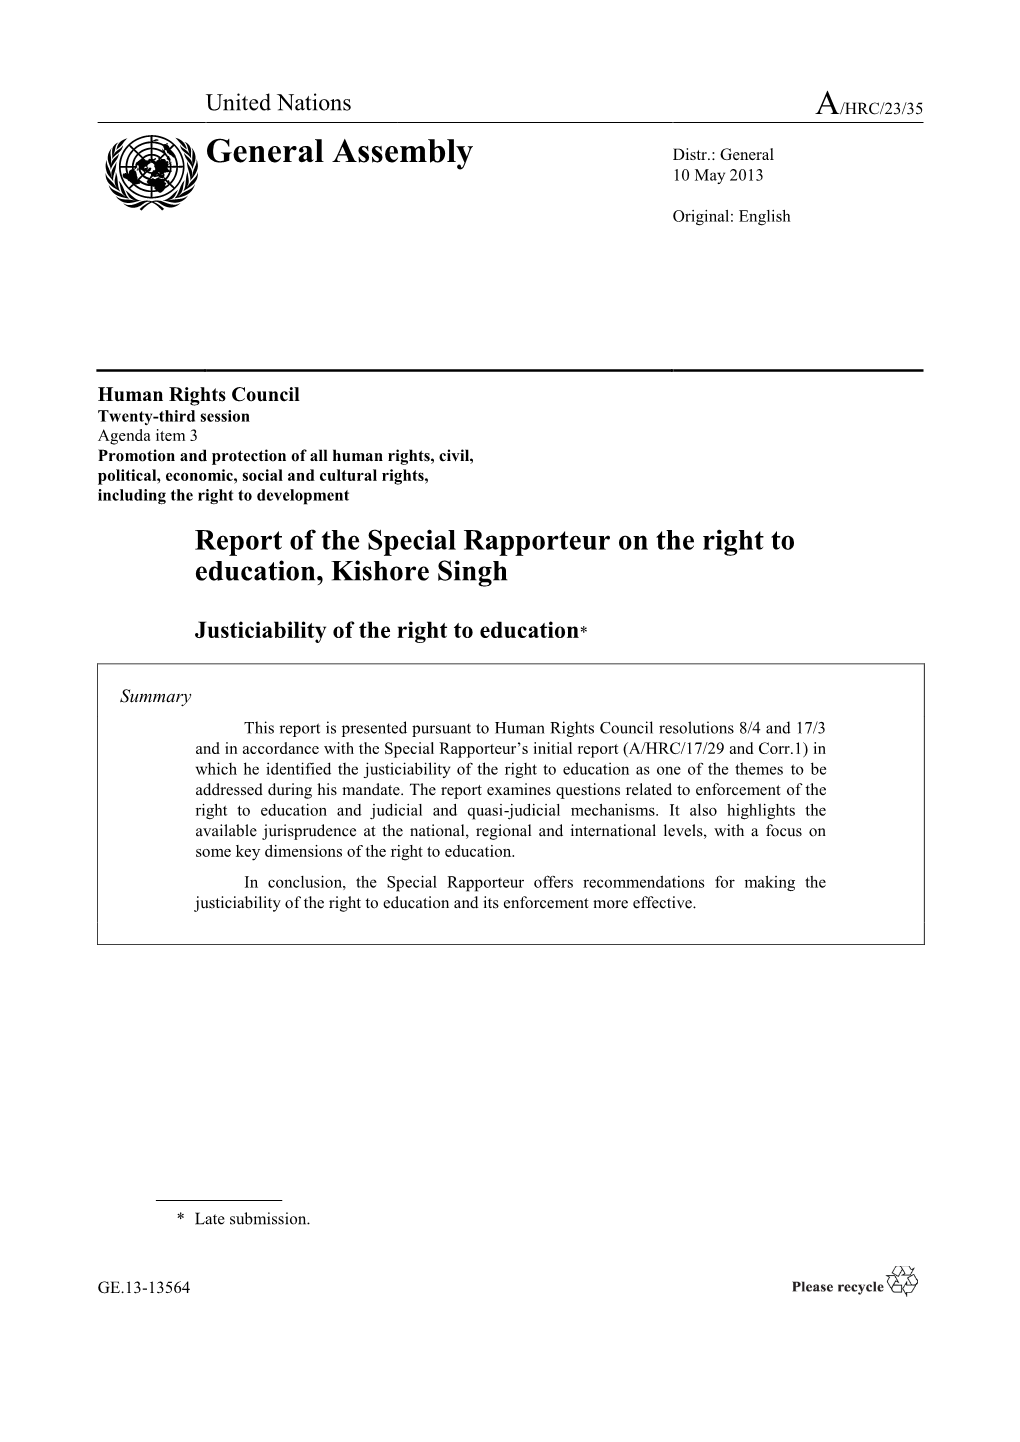 Report of the Special Rapporteur on the Right to Education, Kishore Singh